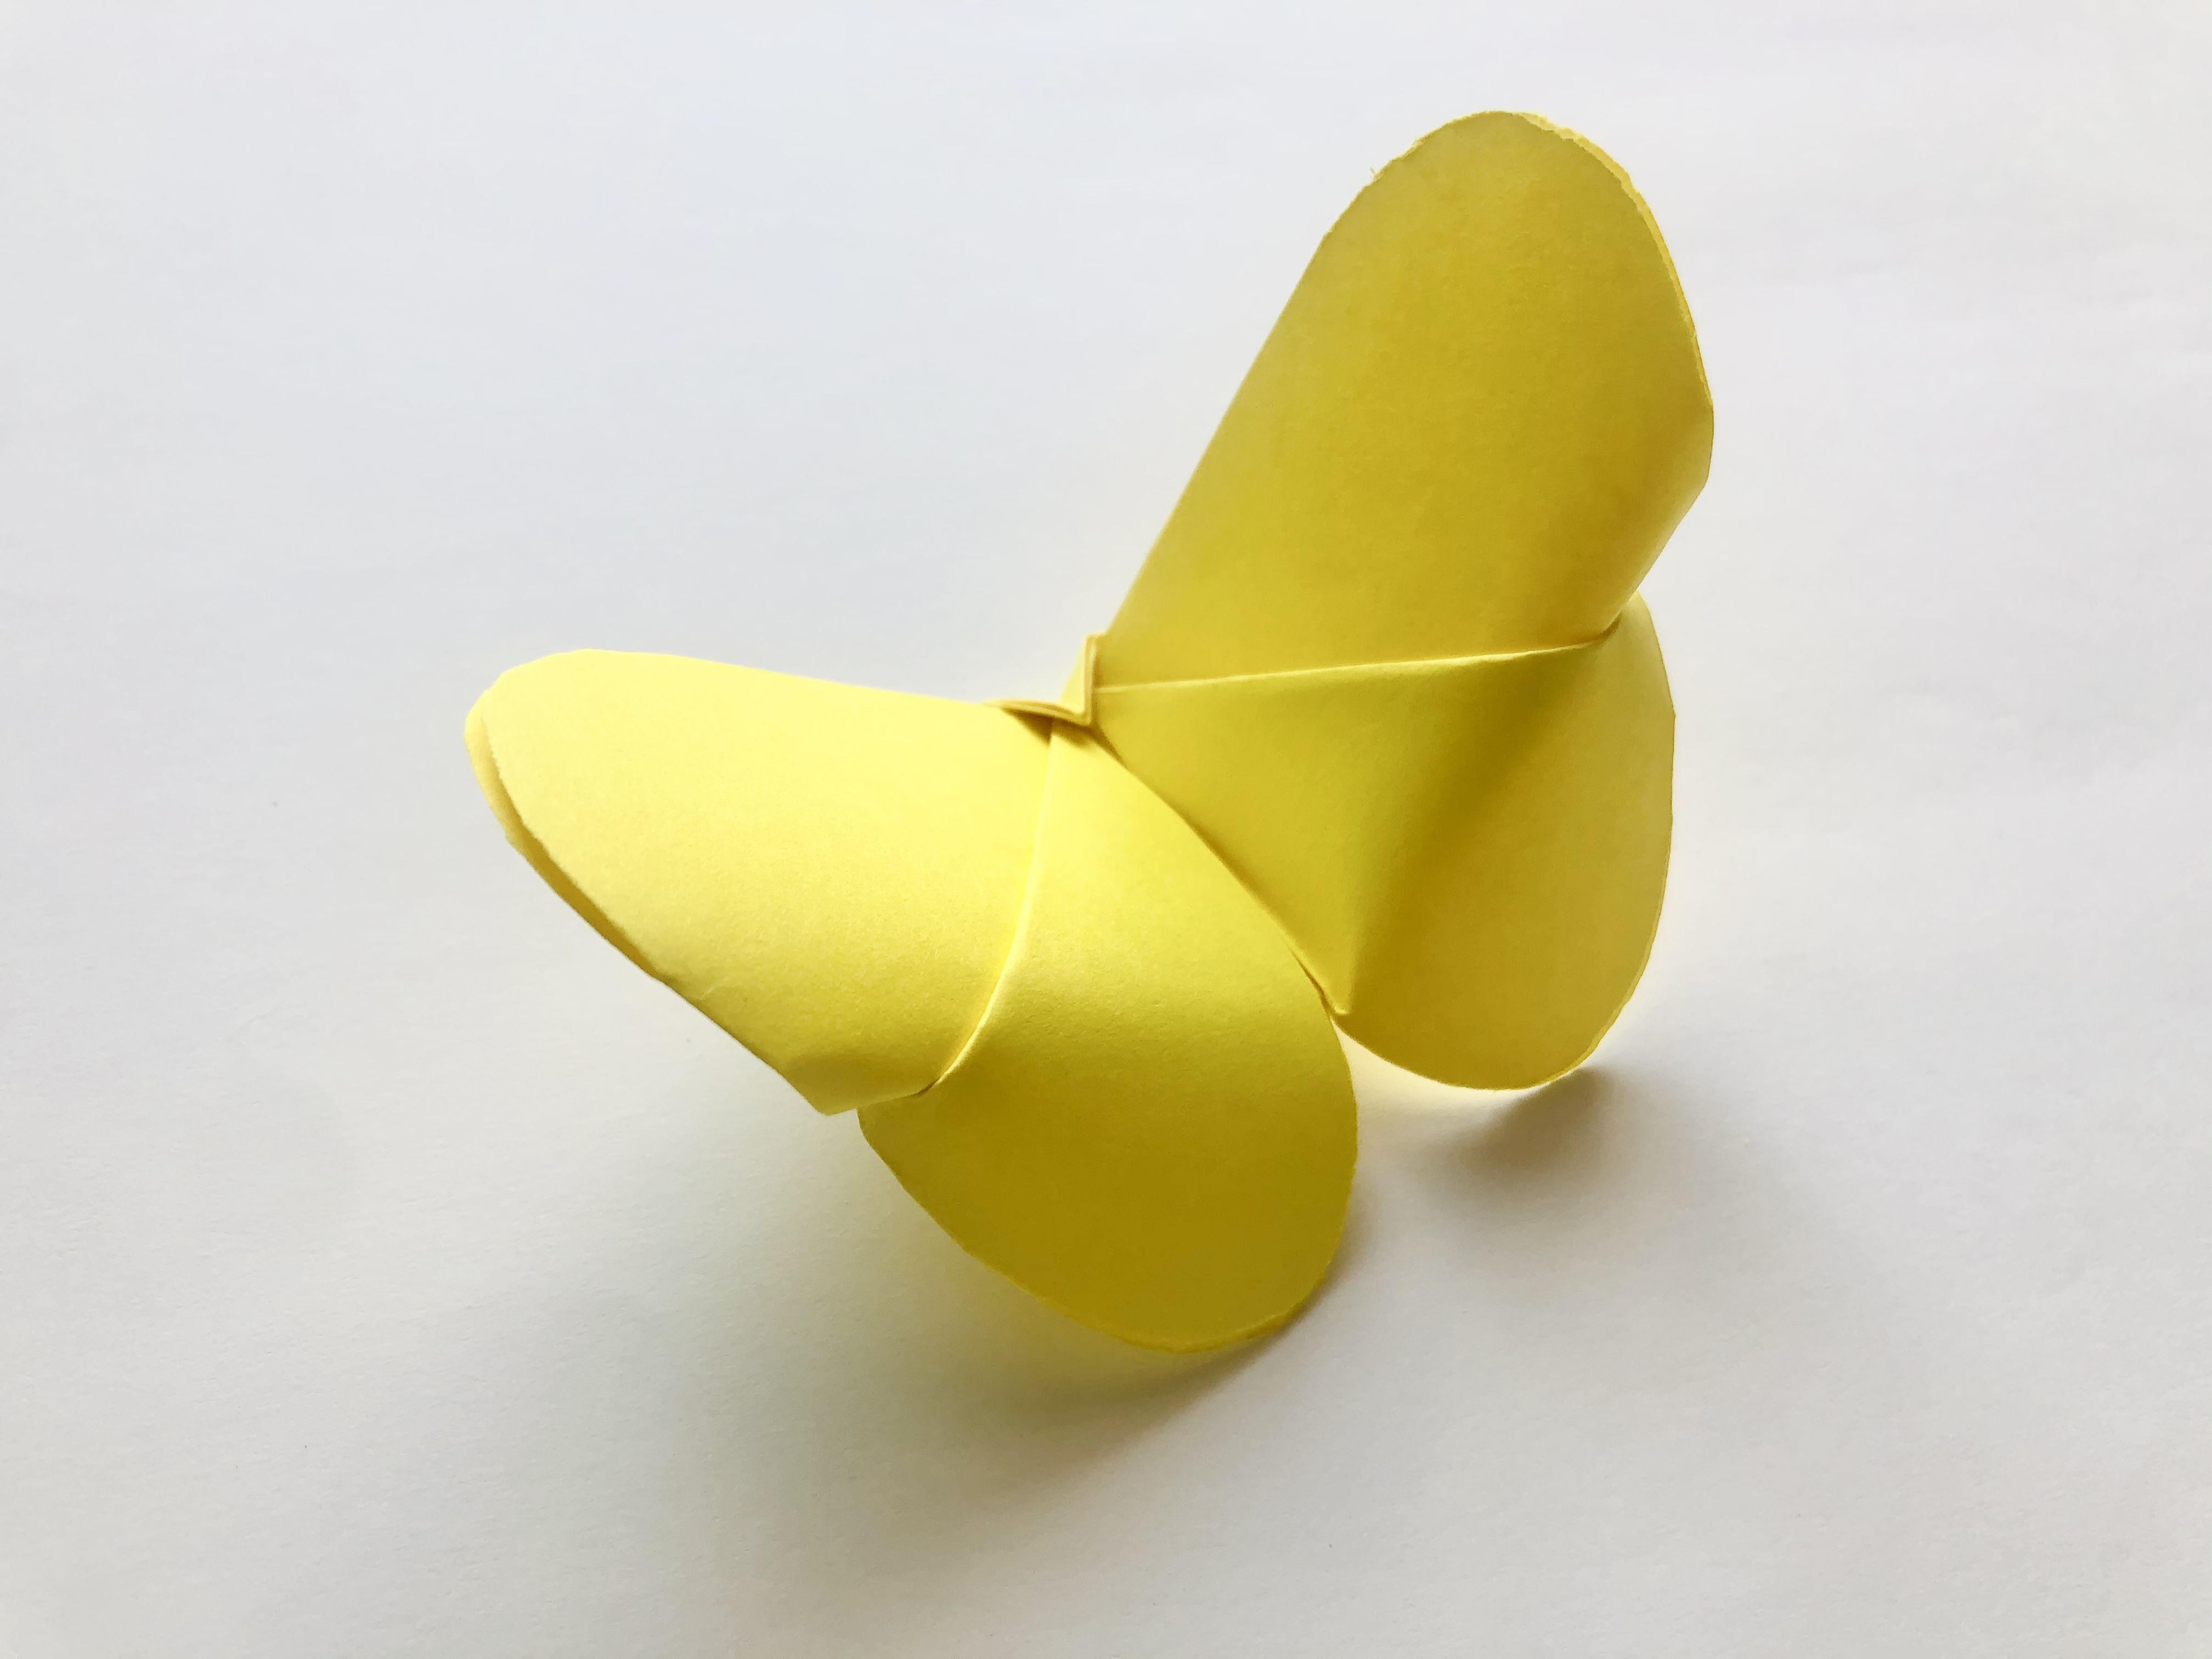 How to make a paper butterfly